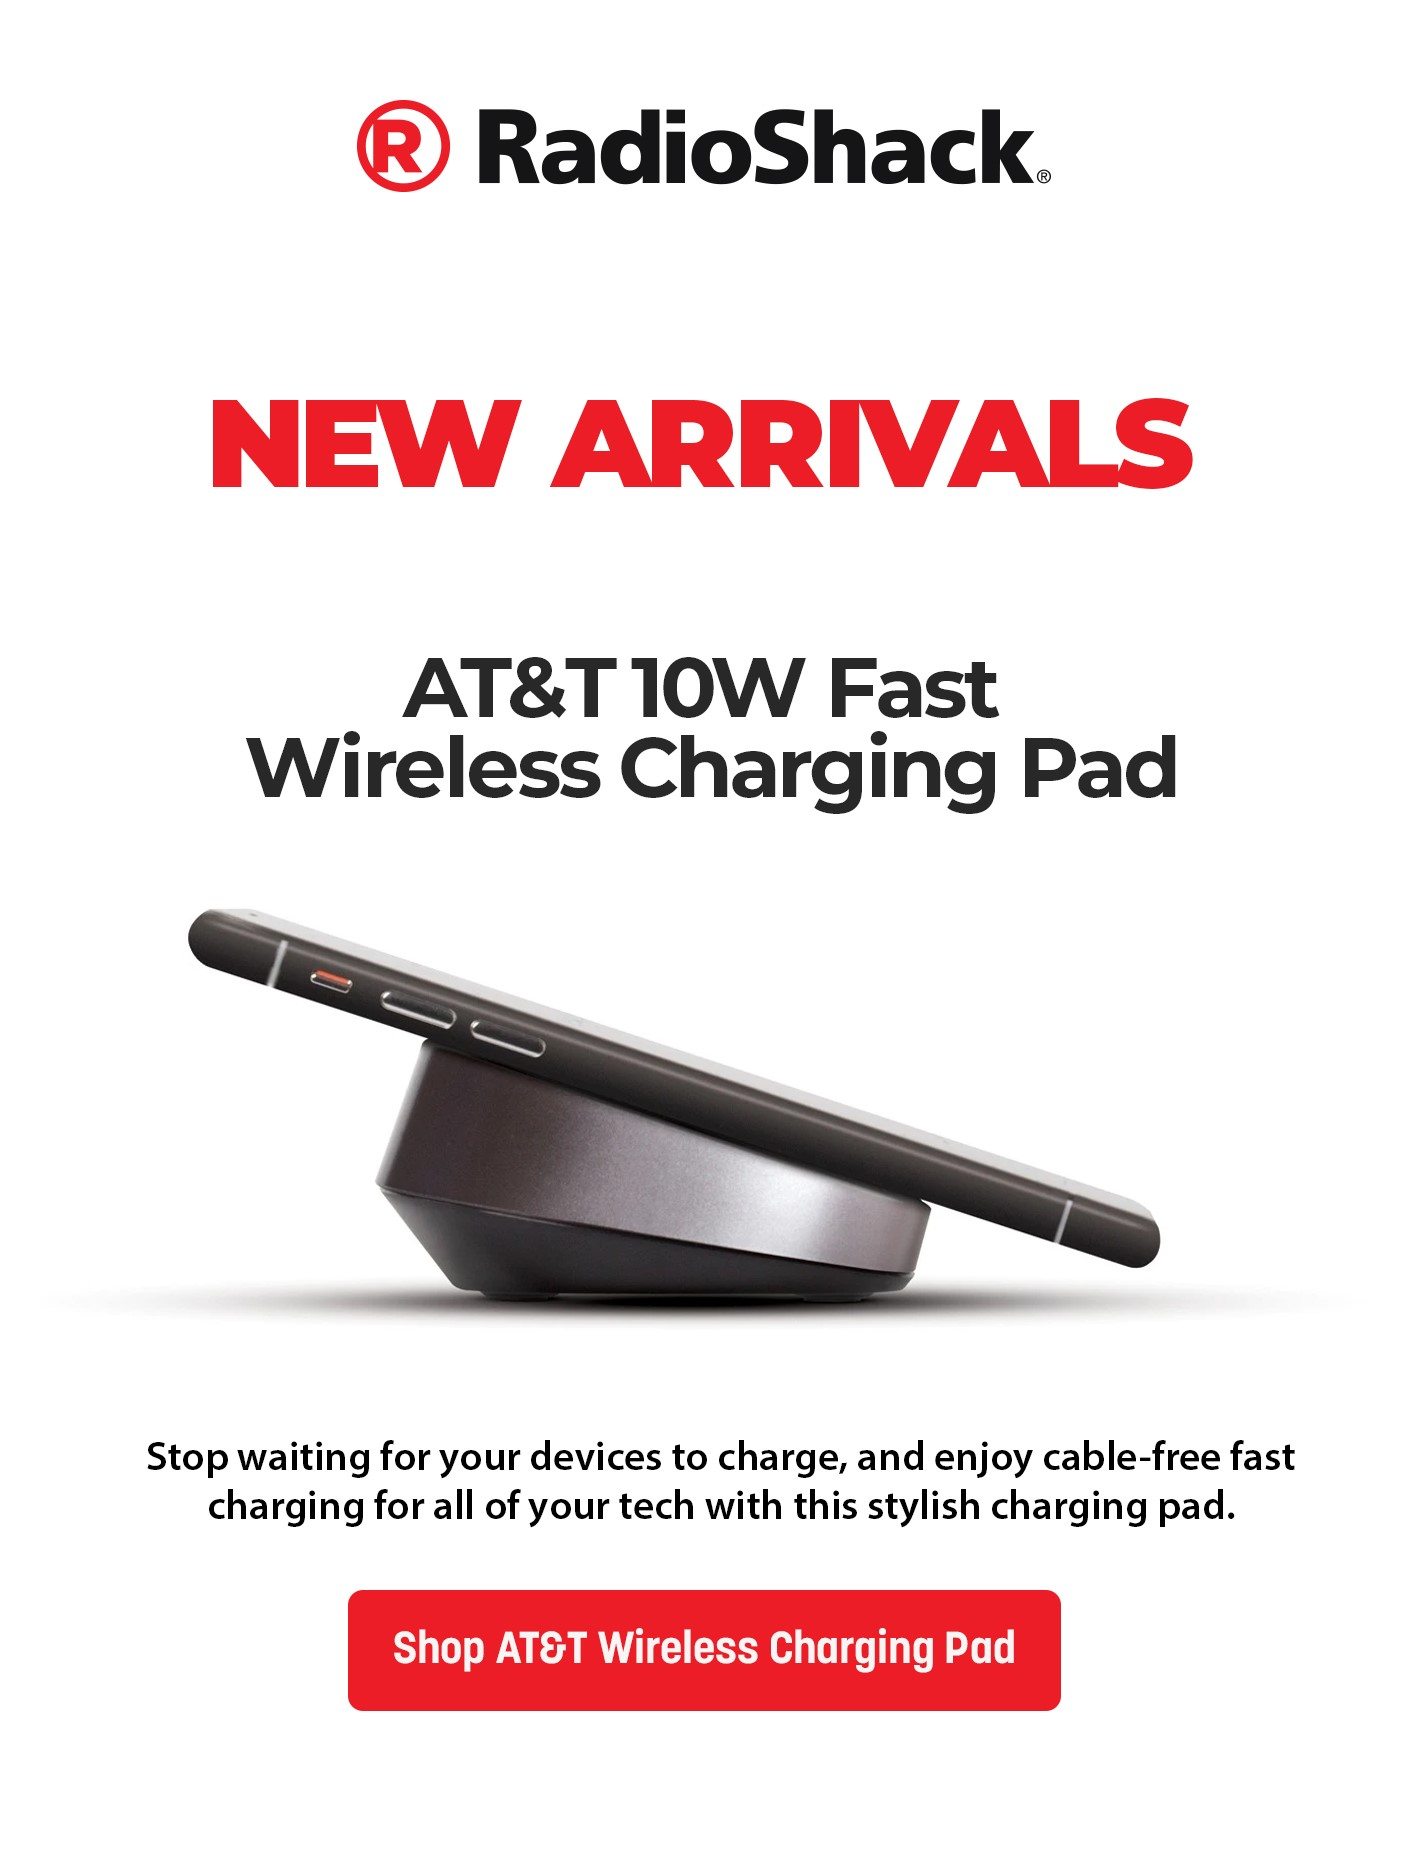 AT&T 10W Fast Charge Wireless Charging Pad with Quick Charge 3.0 Adapter